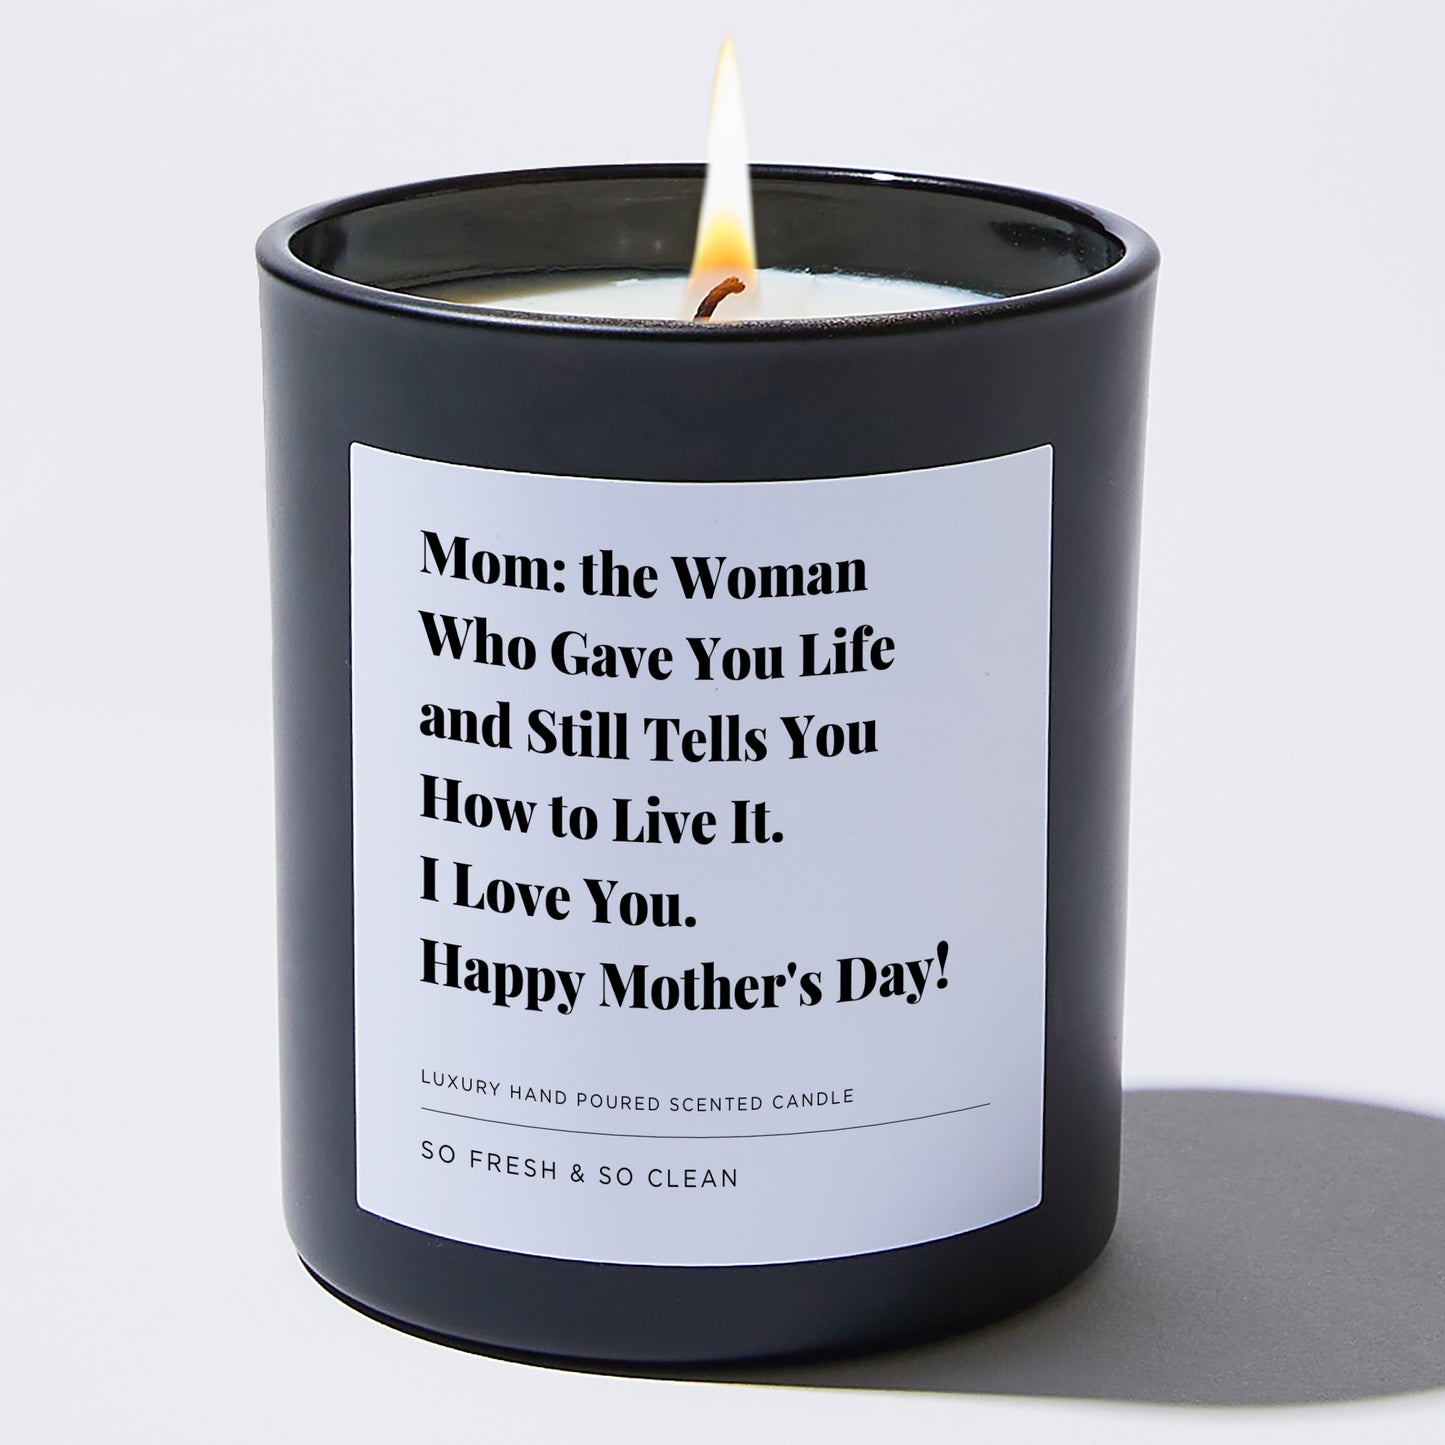 Gift for Mom - Mom: the woman who gave you life and still tells you how to live it. I Love You. Happy Mother's Day! - Candle